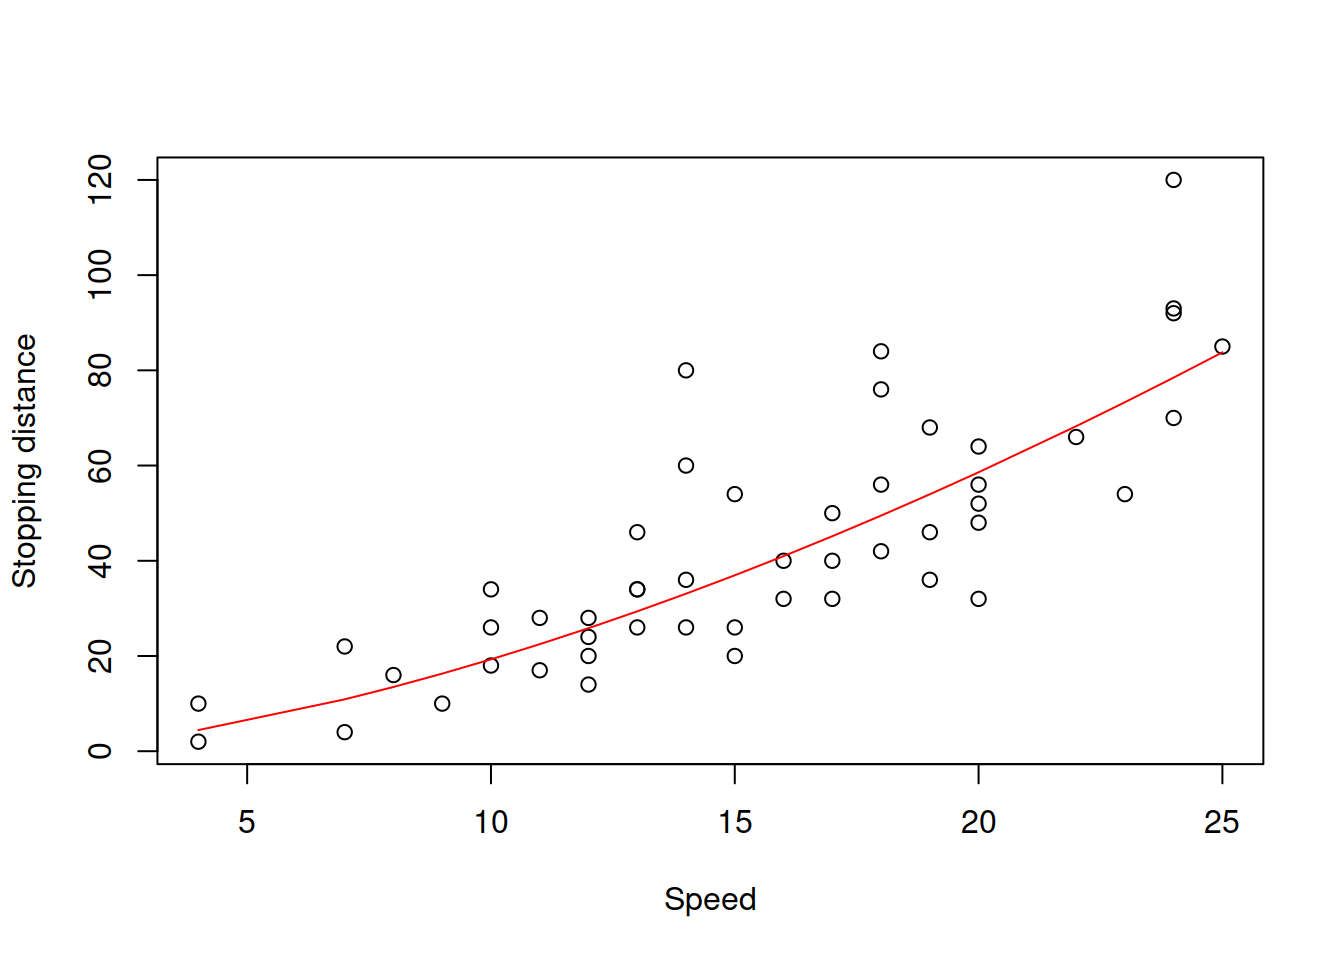 Speed vs stopping distance and the log-log model fit.